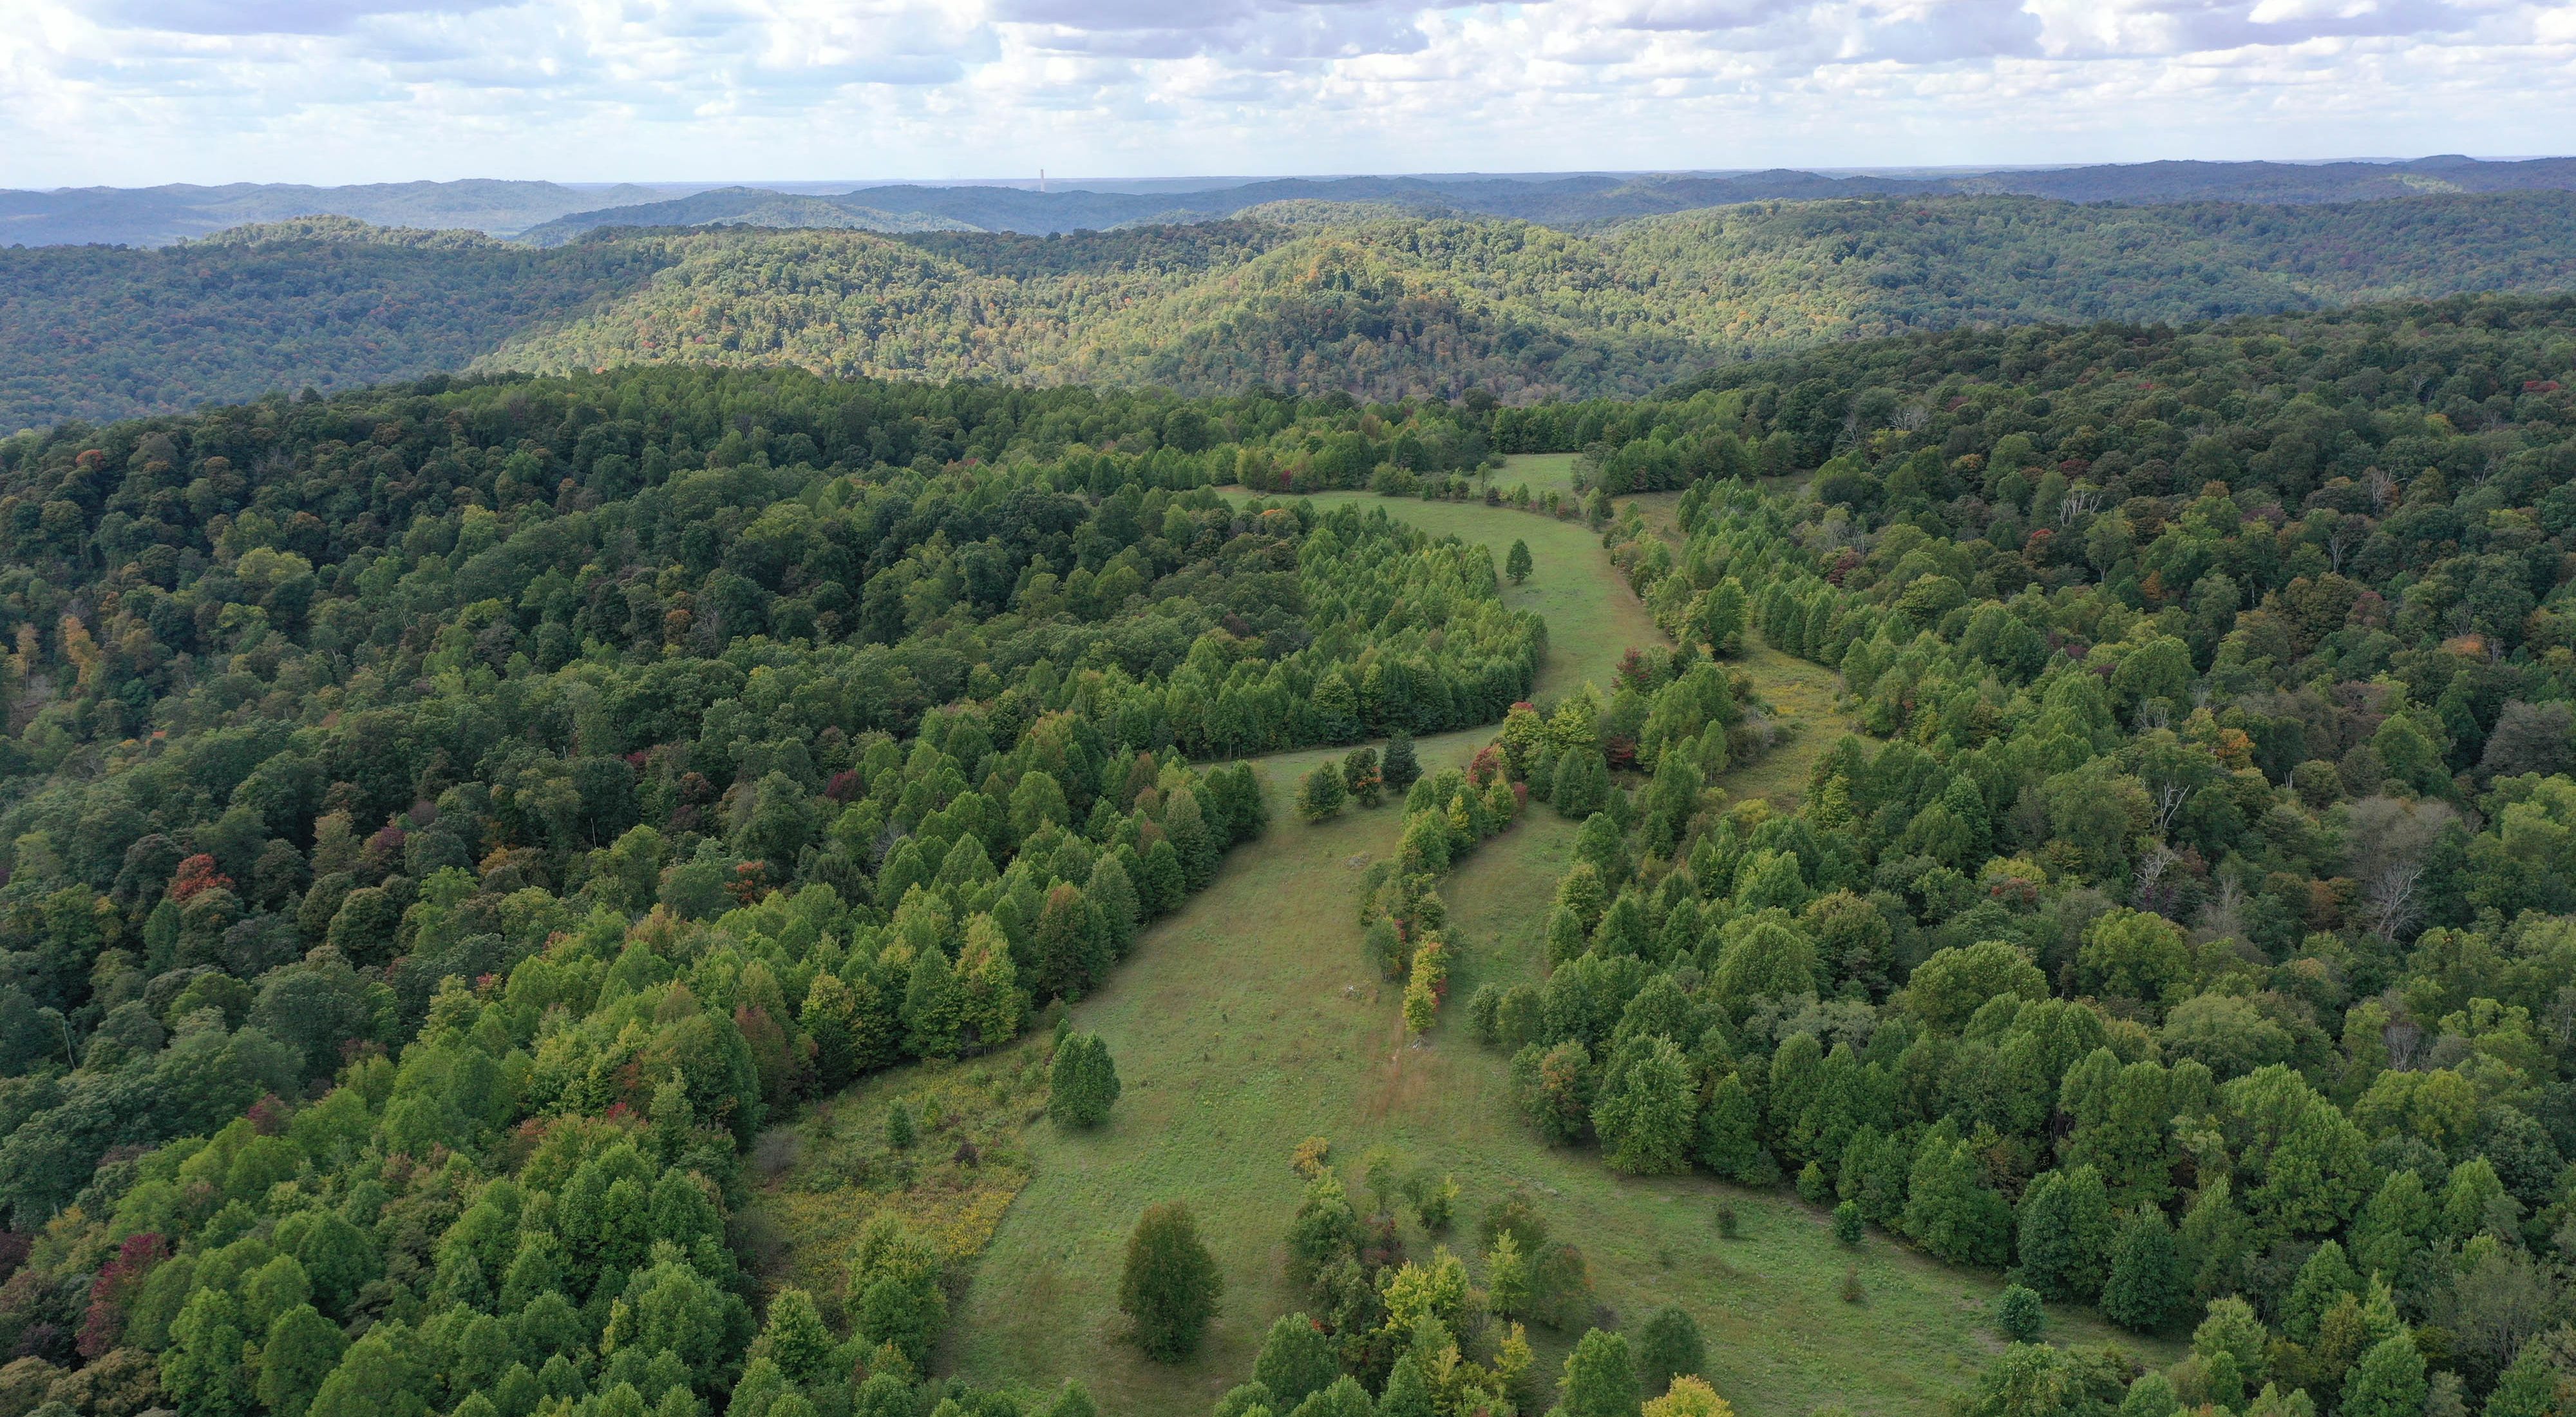 Aerial view of Edge of Appalachia Preserve forests.